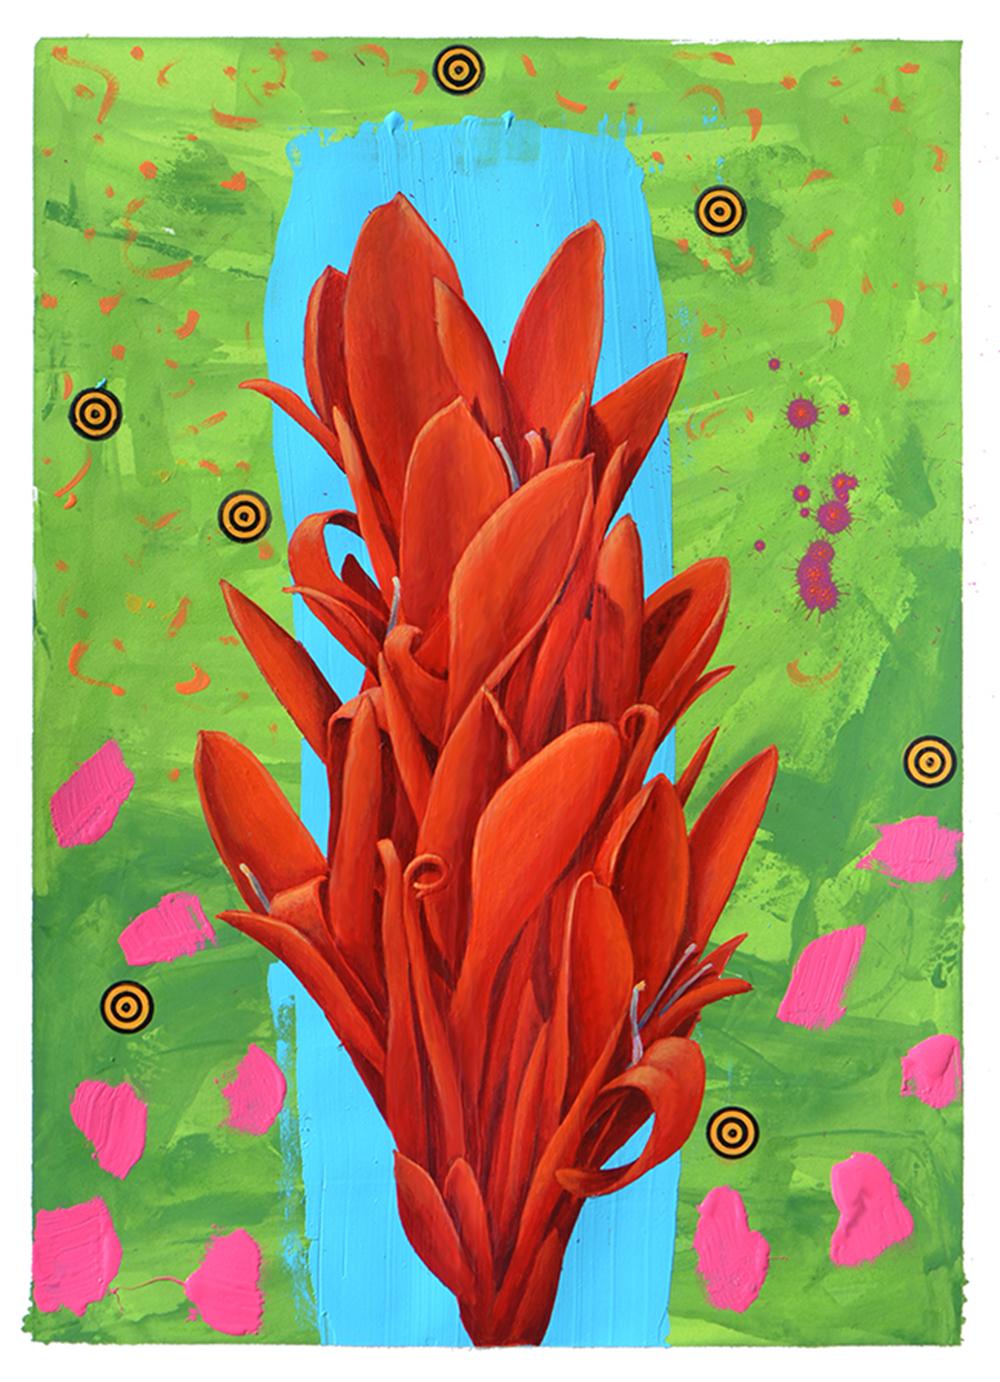 Scott McIntire Figurative Painting - Red Canna Lily